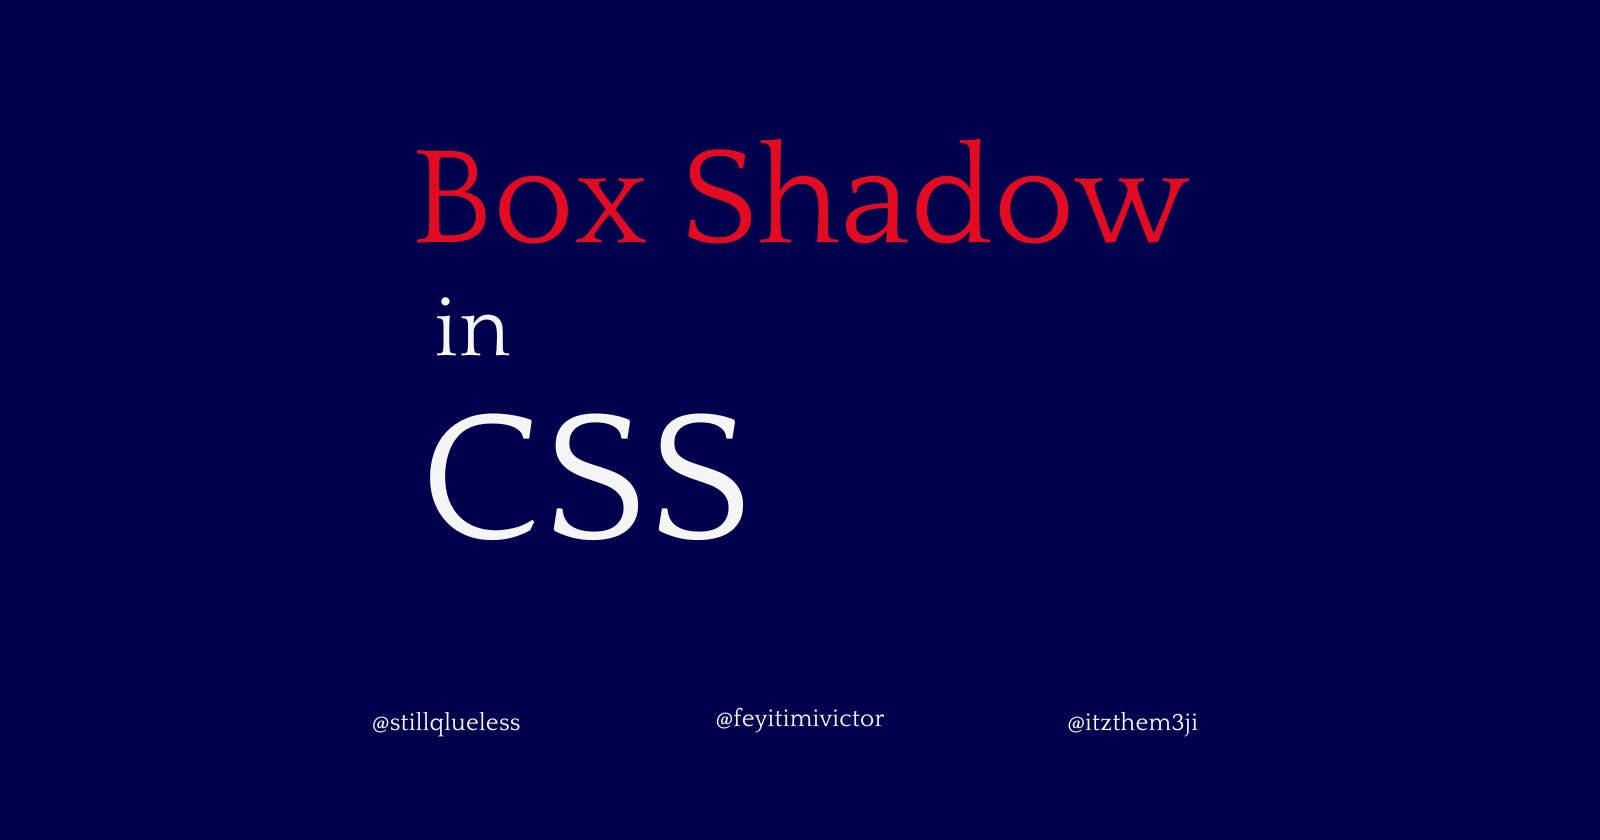 Box Shadow in CSS